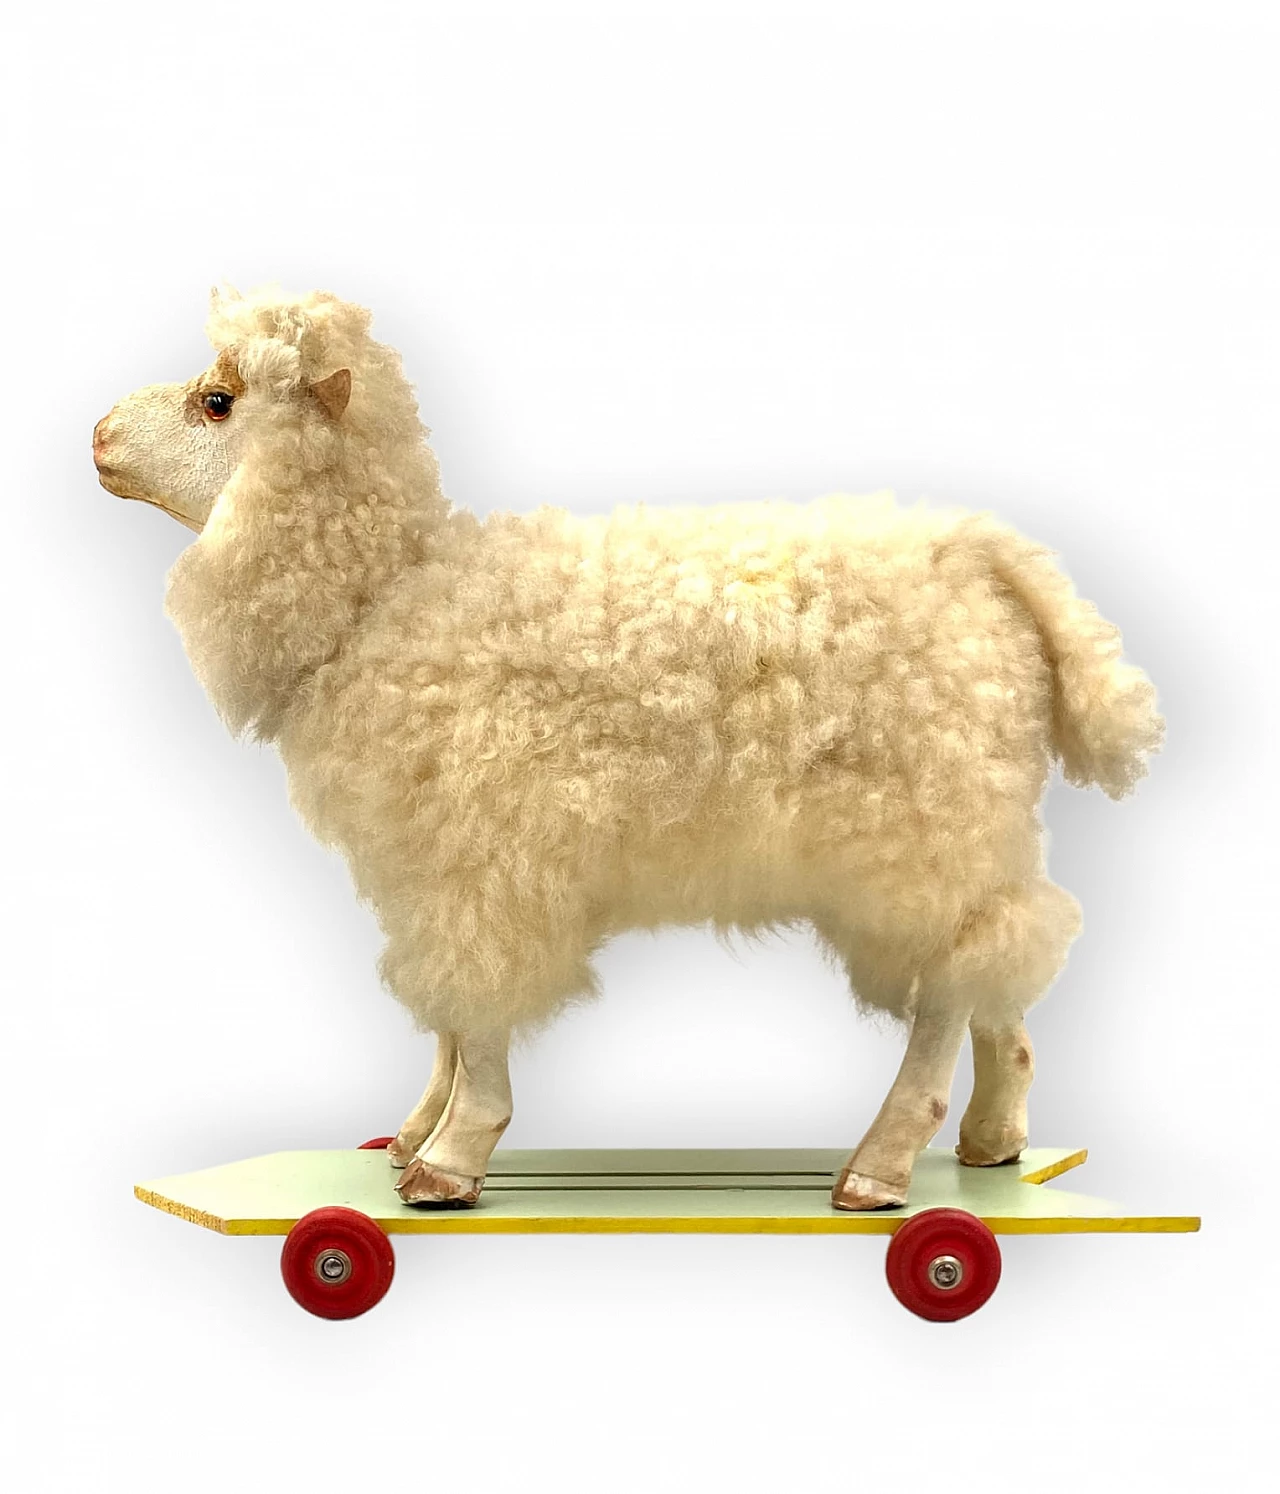 Wool and wood toy sheep with wheels 1